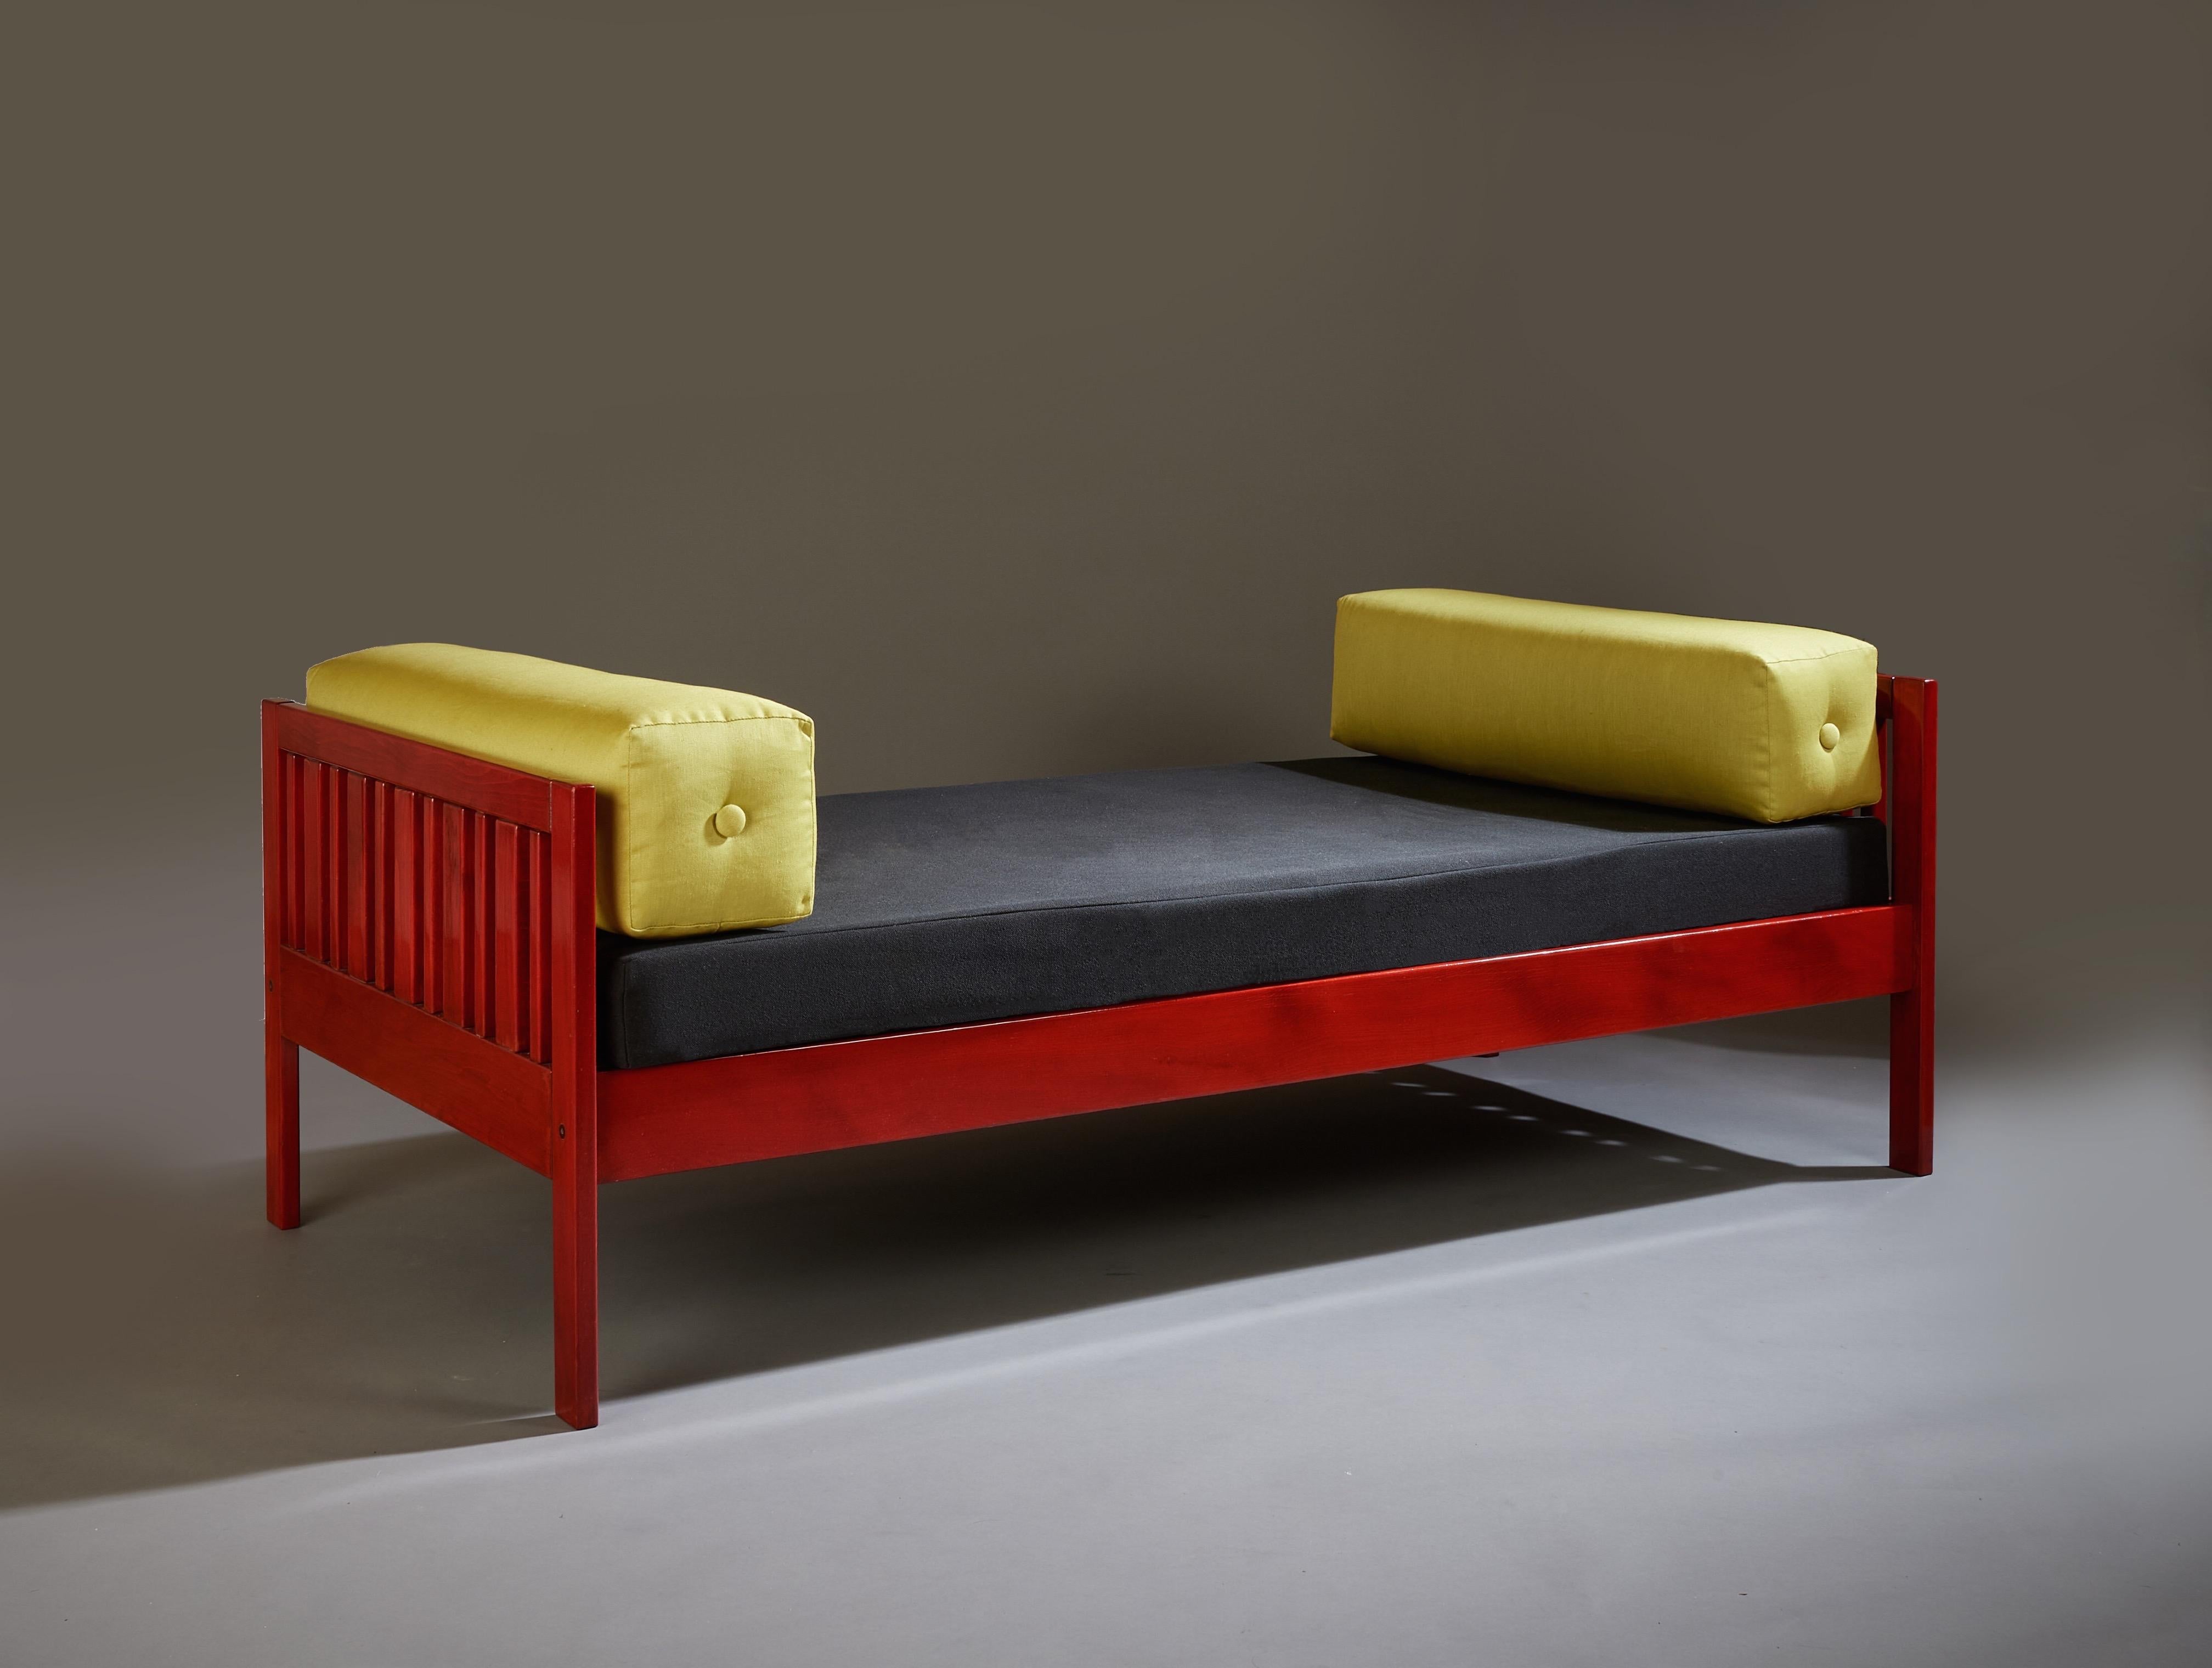 Ettore Sottsass Daybed, Red Lacquered Wood, Chartreuse Upholstery, Italy c. 1962 For Sale 2